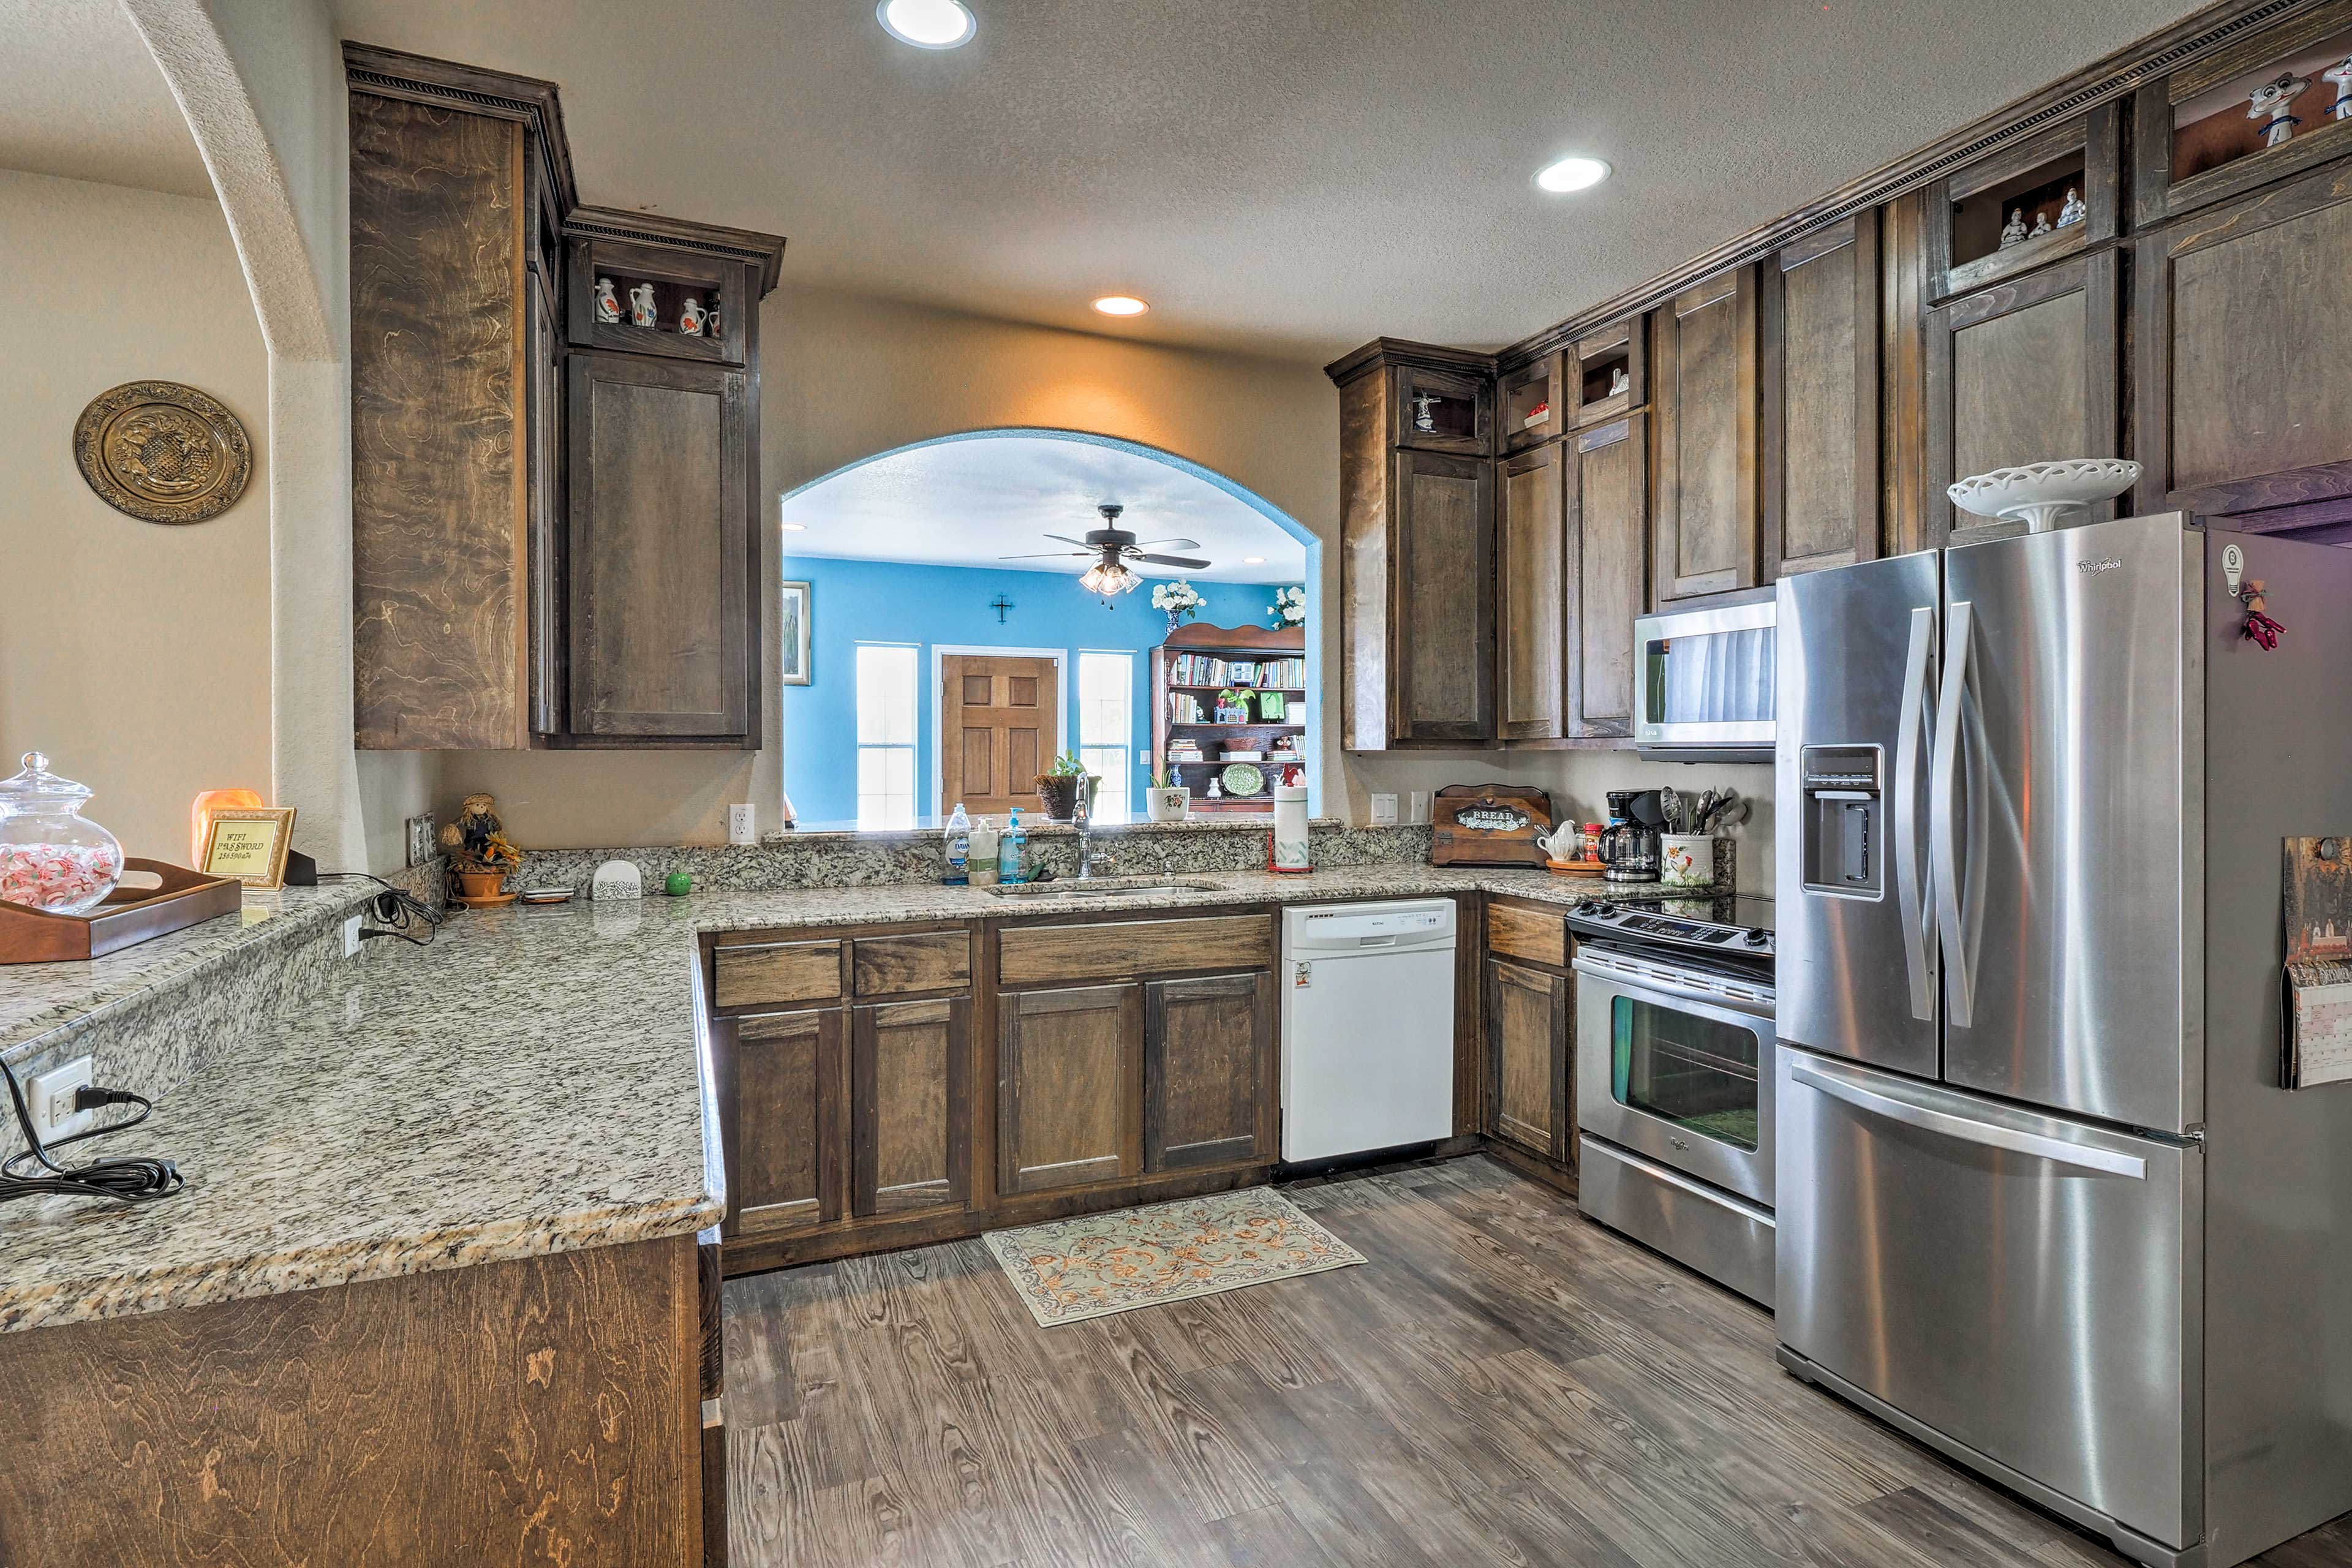 The kitchen boasts beautiful granite counters and stainless steel appliances.